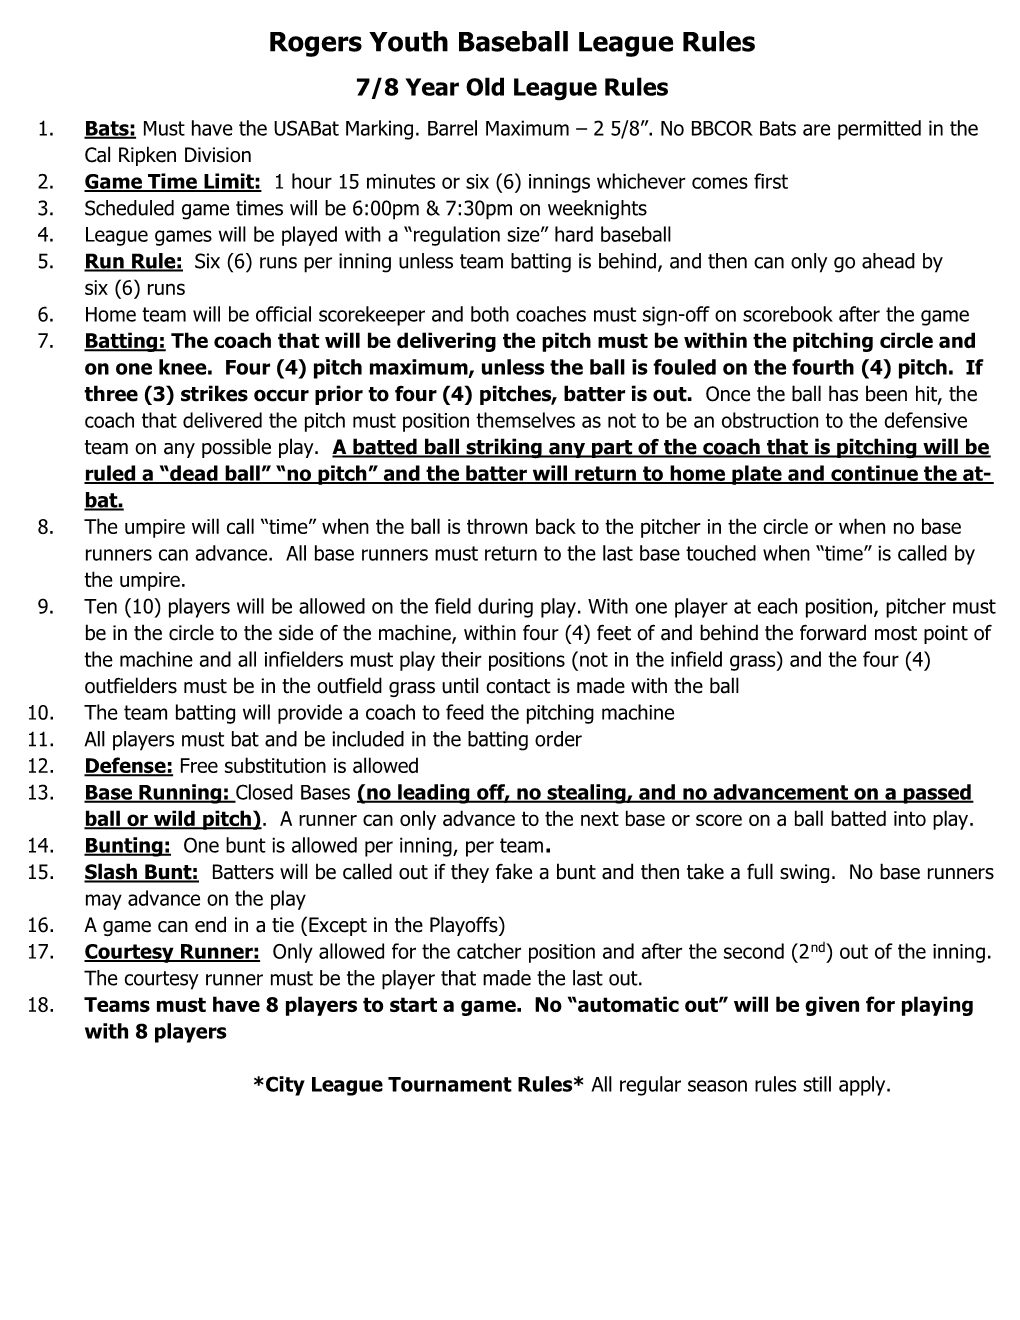 Rogers Youth Baseball League Rules 7/8 Year Old League Rules 1